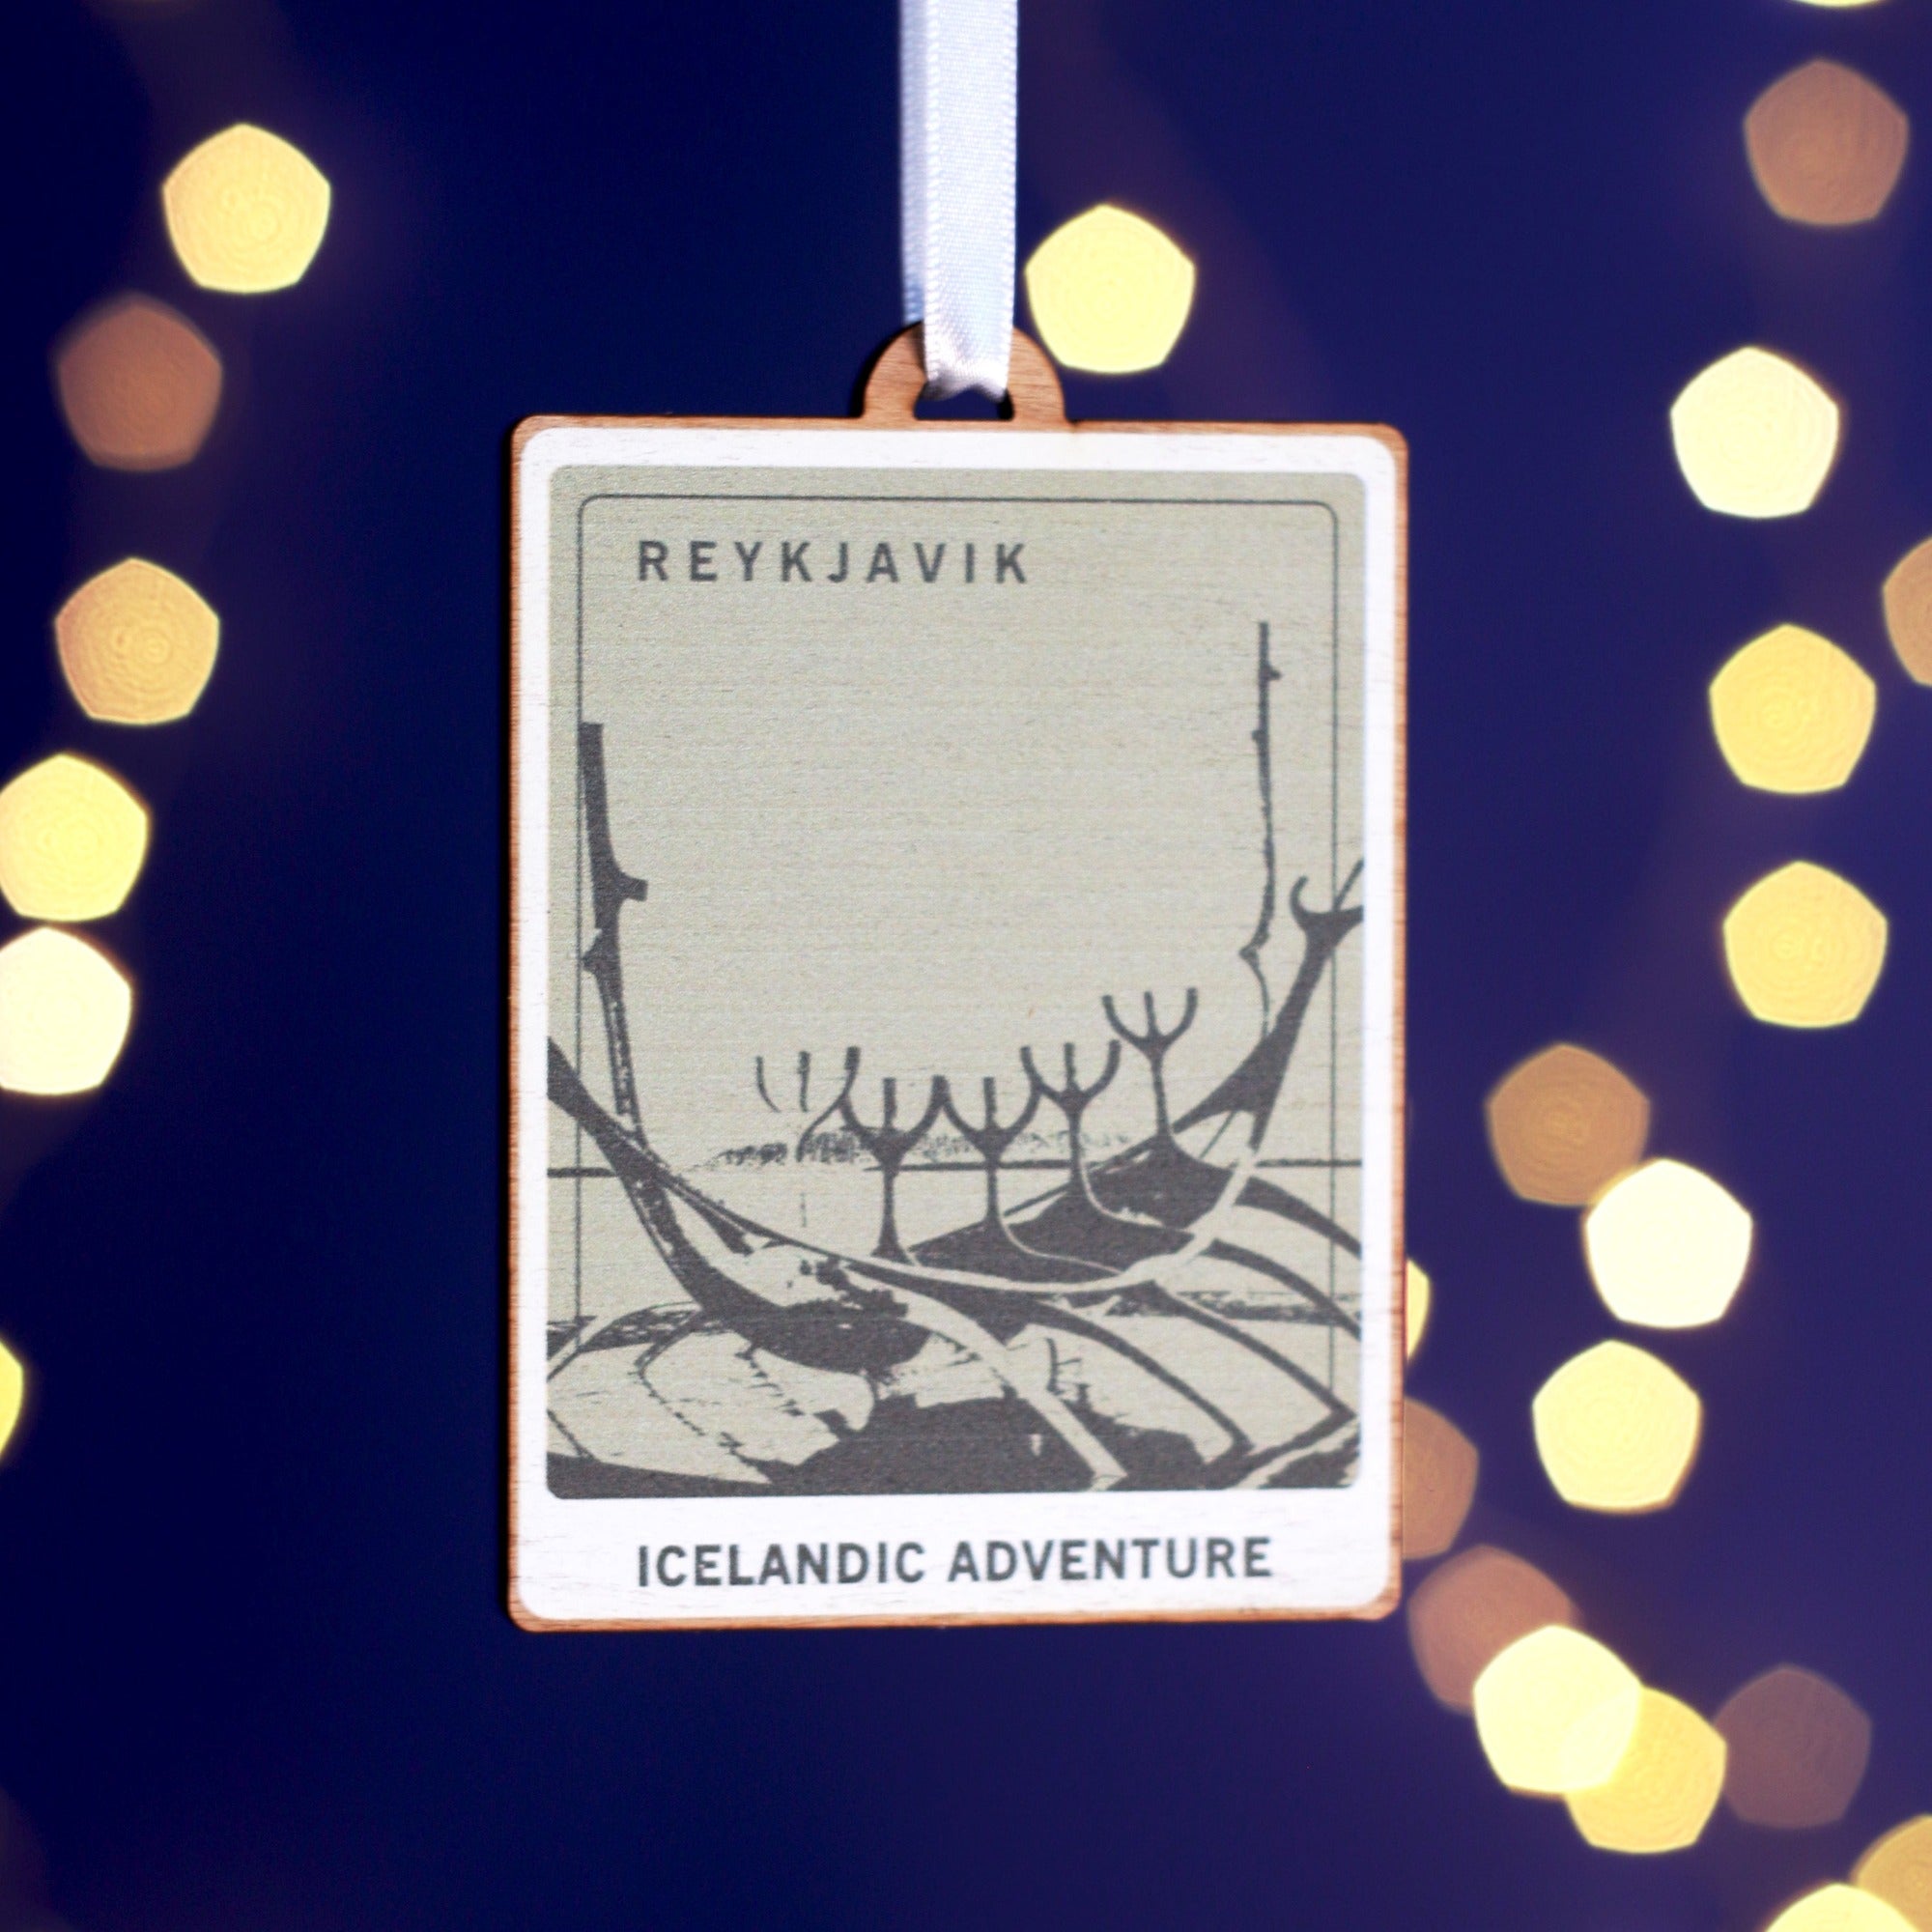 Wooden Christmas decoration with a picture representing Reykjavik printed on it.